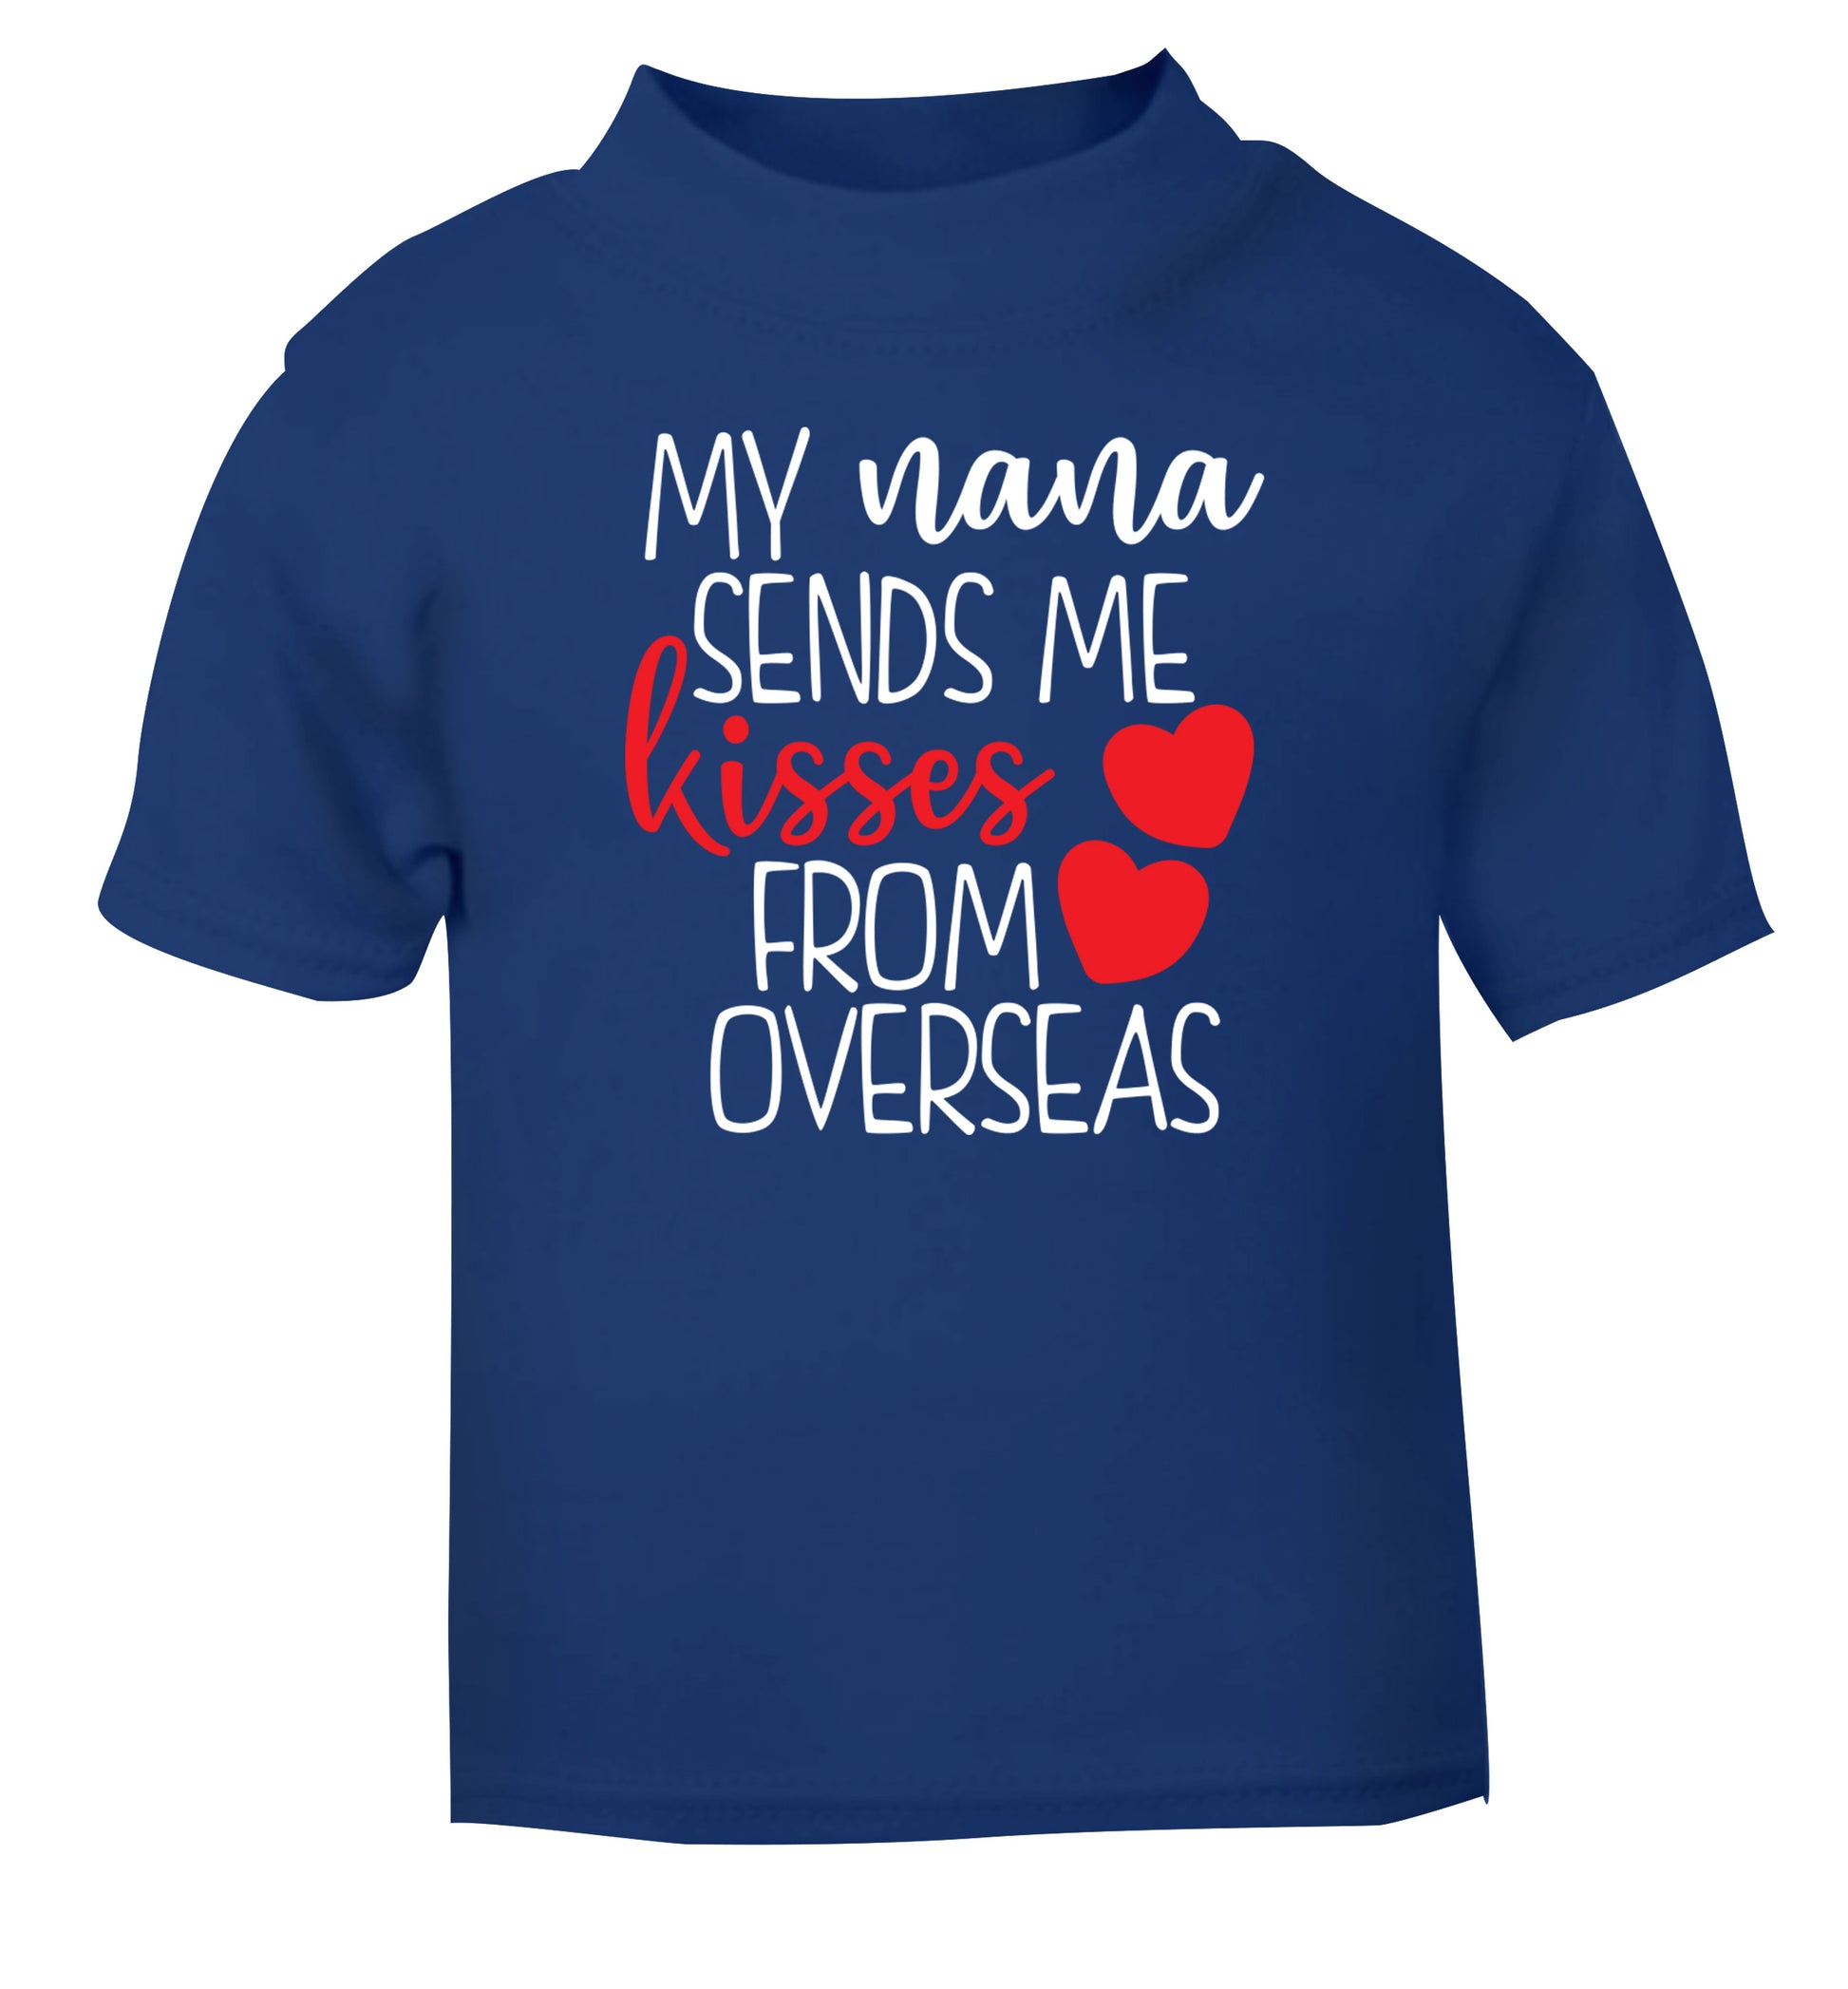 My nana sends me kisses from overseas blue Baby Toddler Tshirt 2 Years